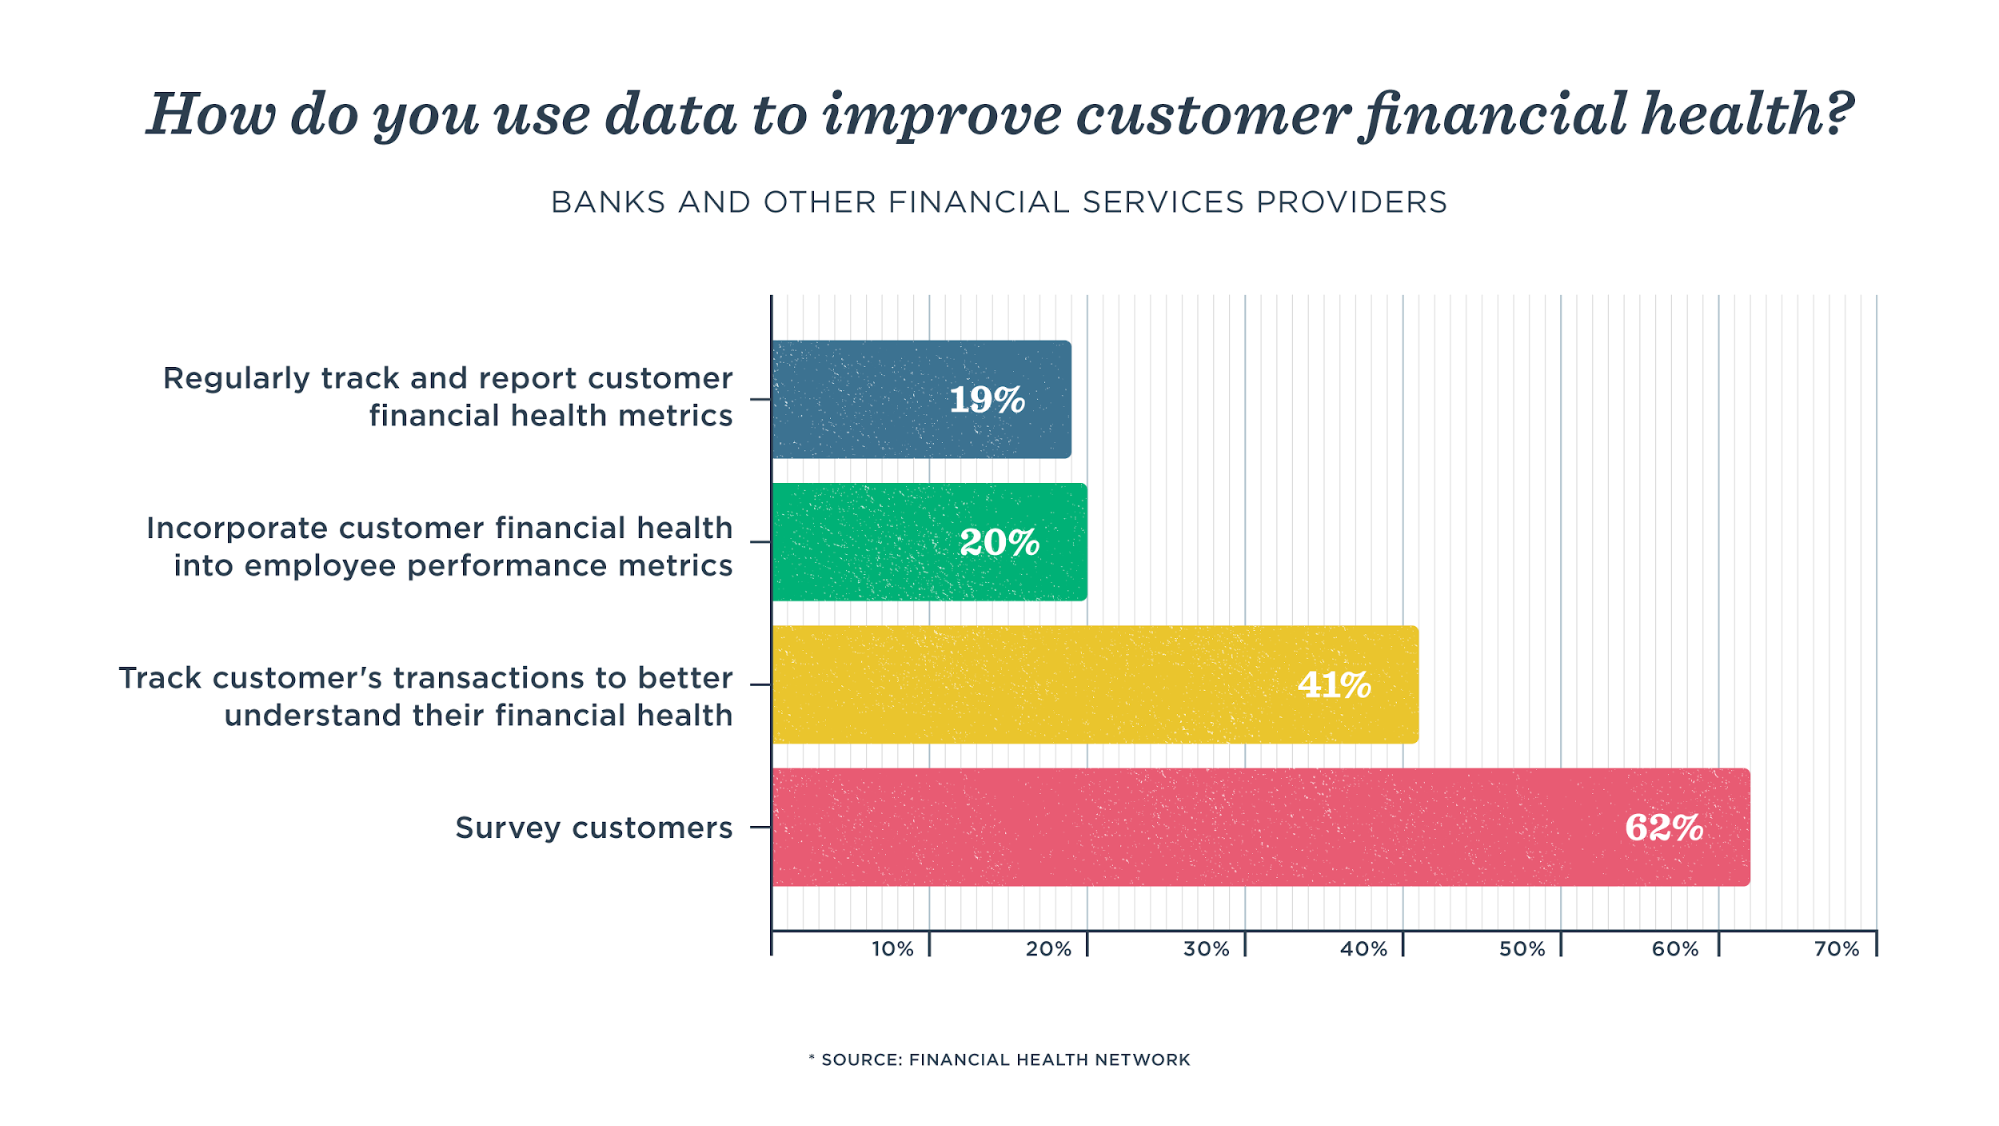 Financially healthy customers are good for business